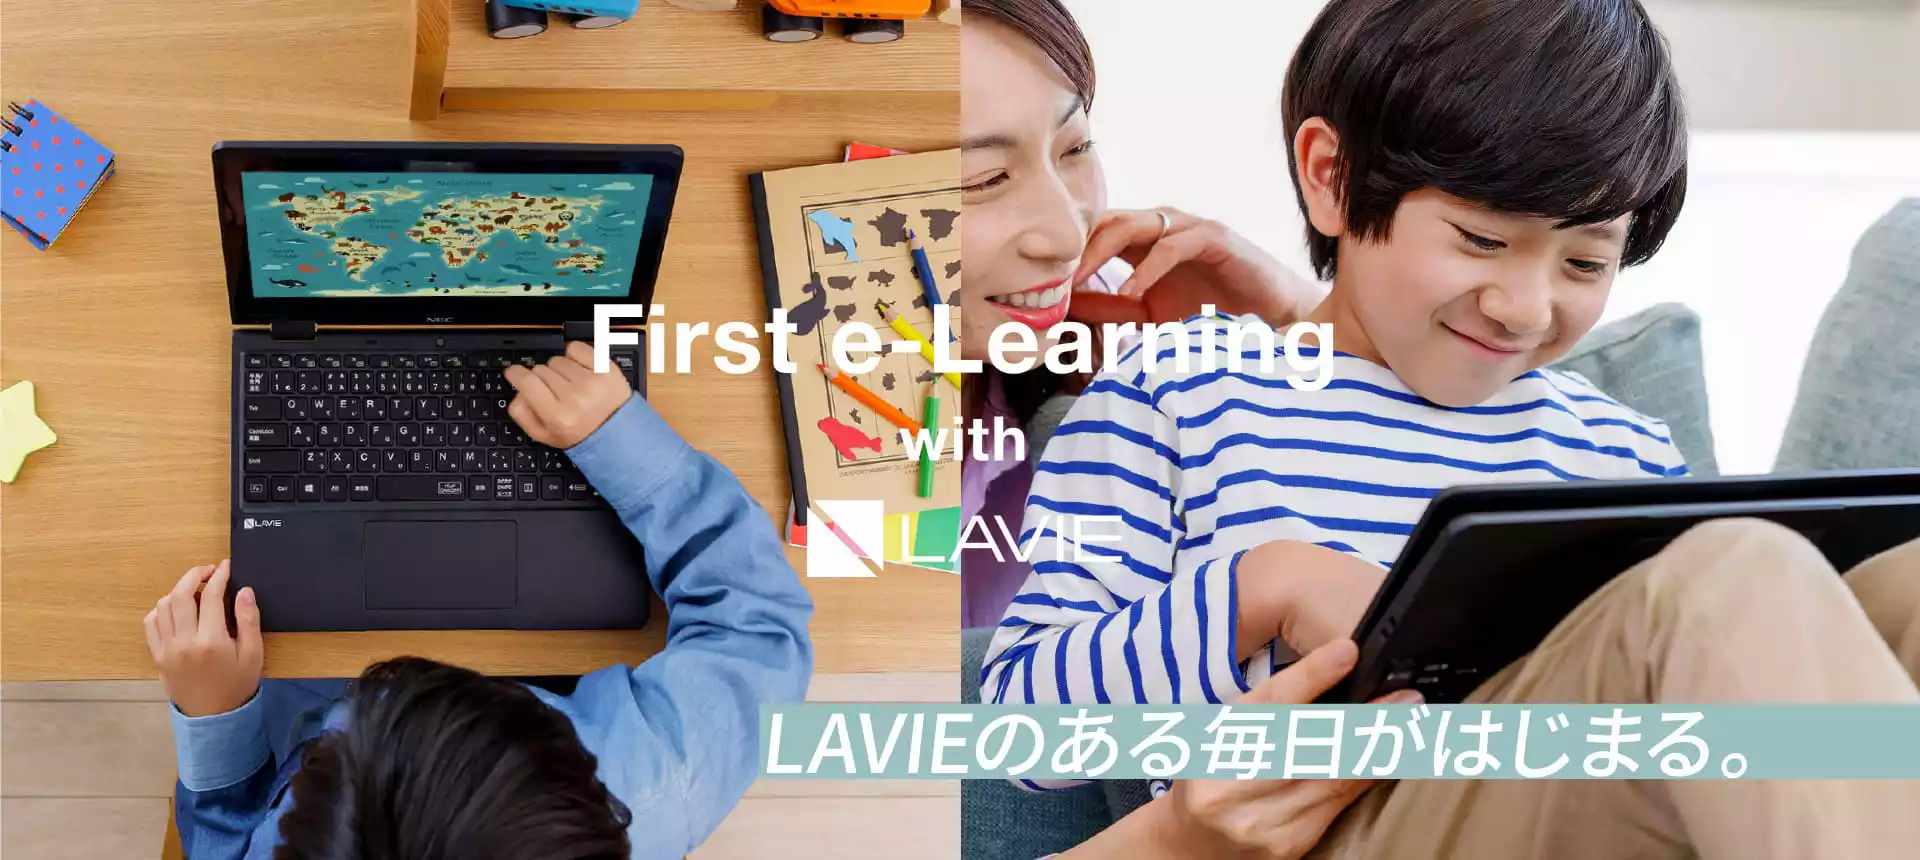 First e-Learning with LAVIE